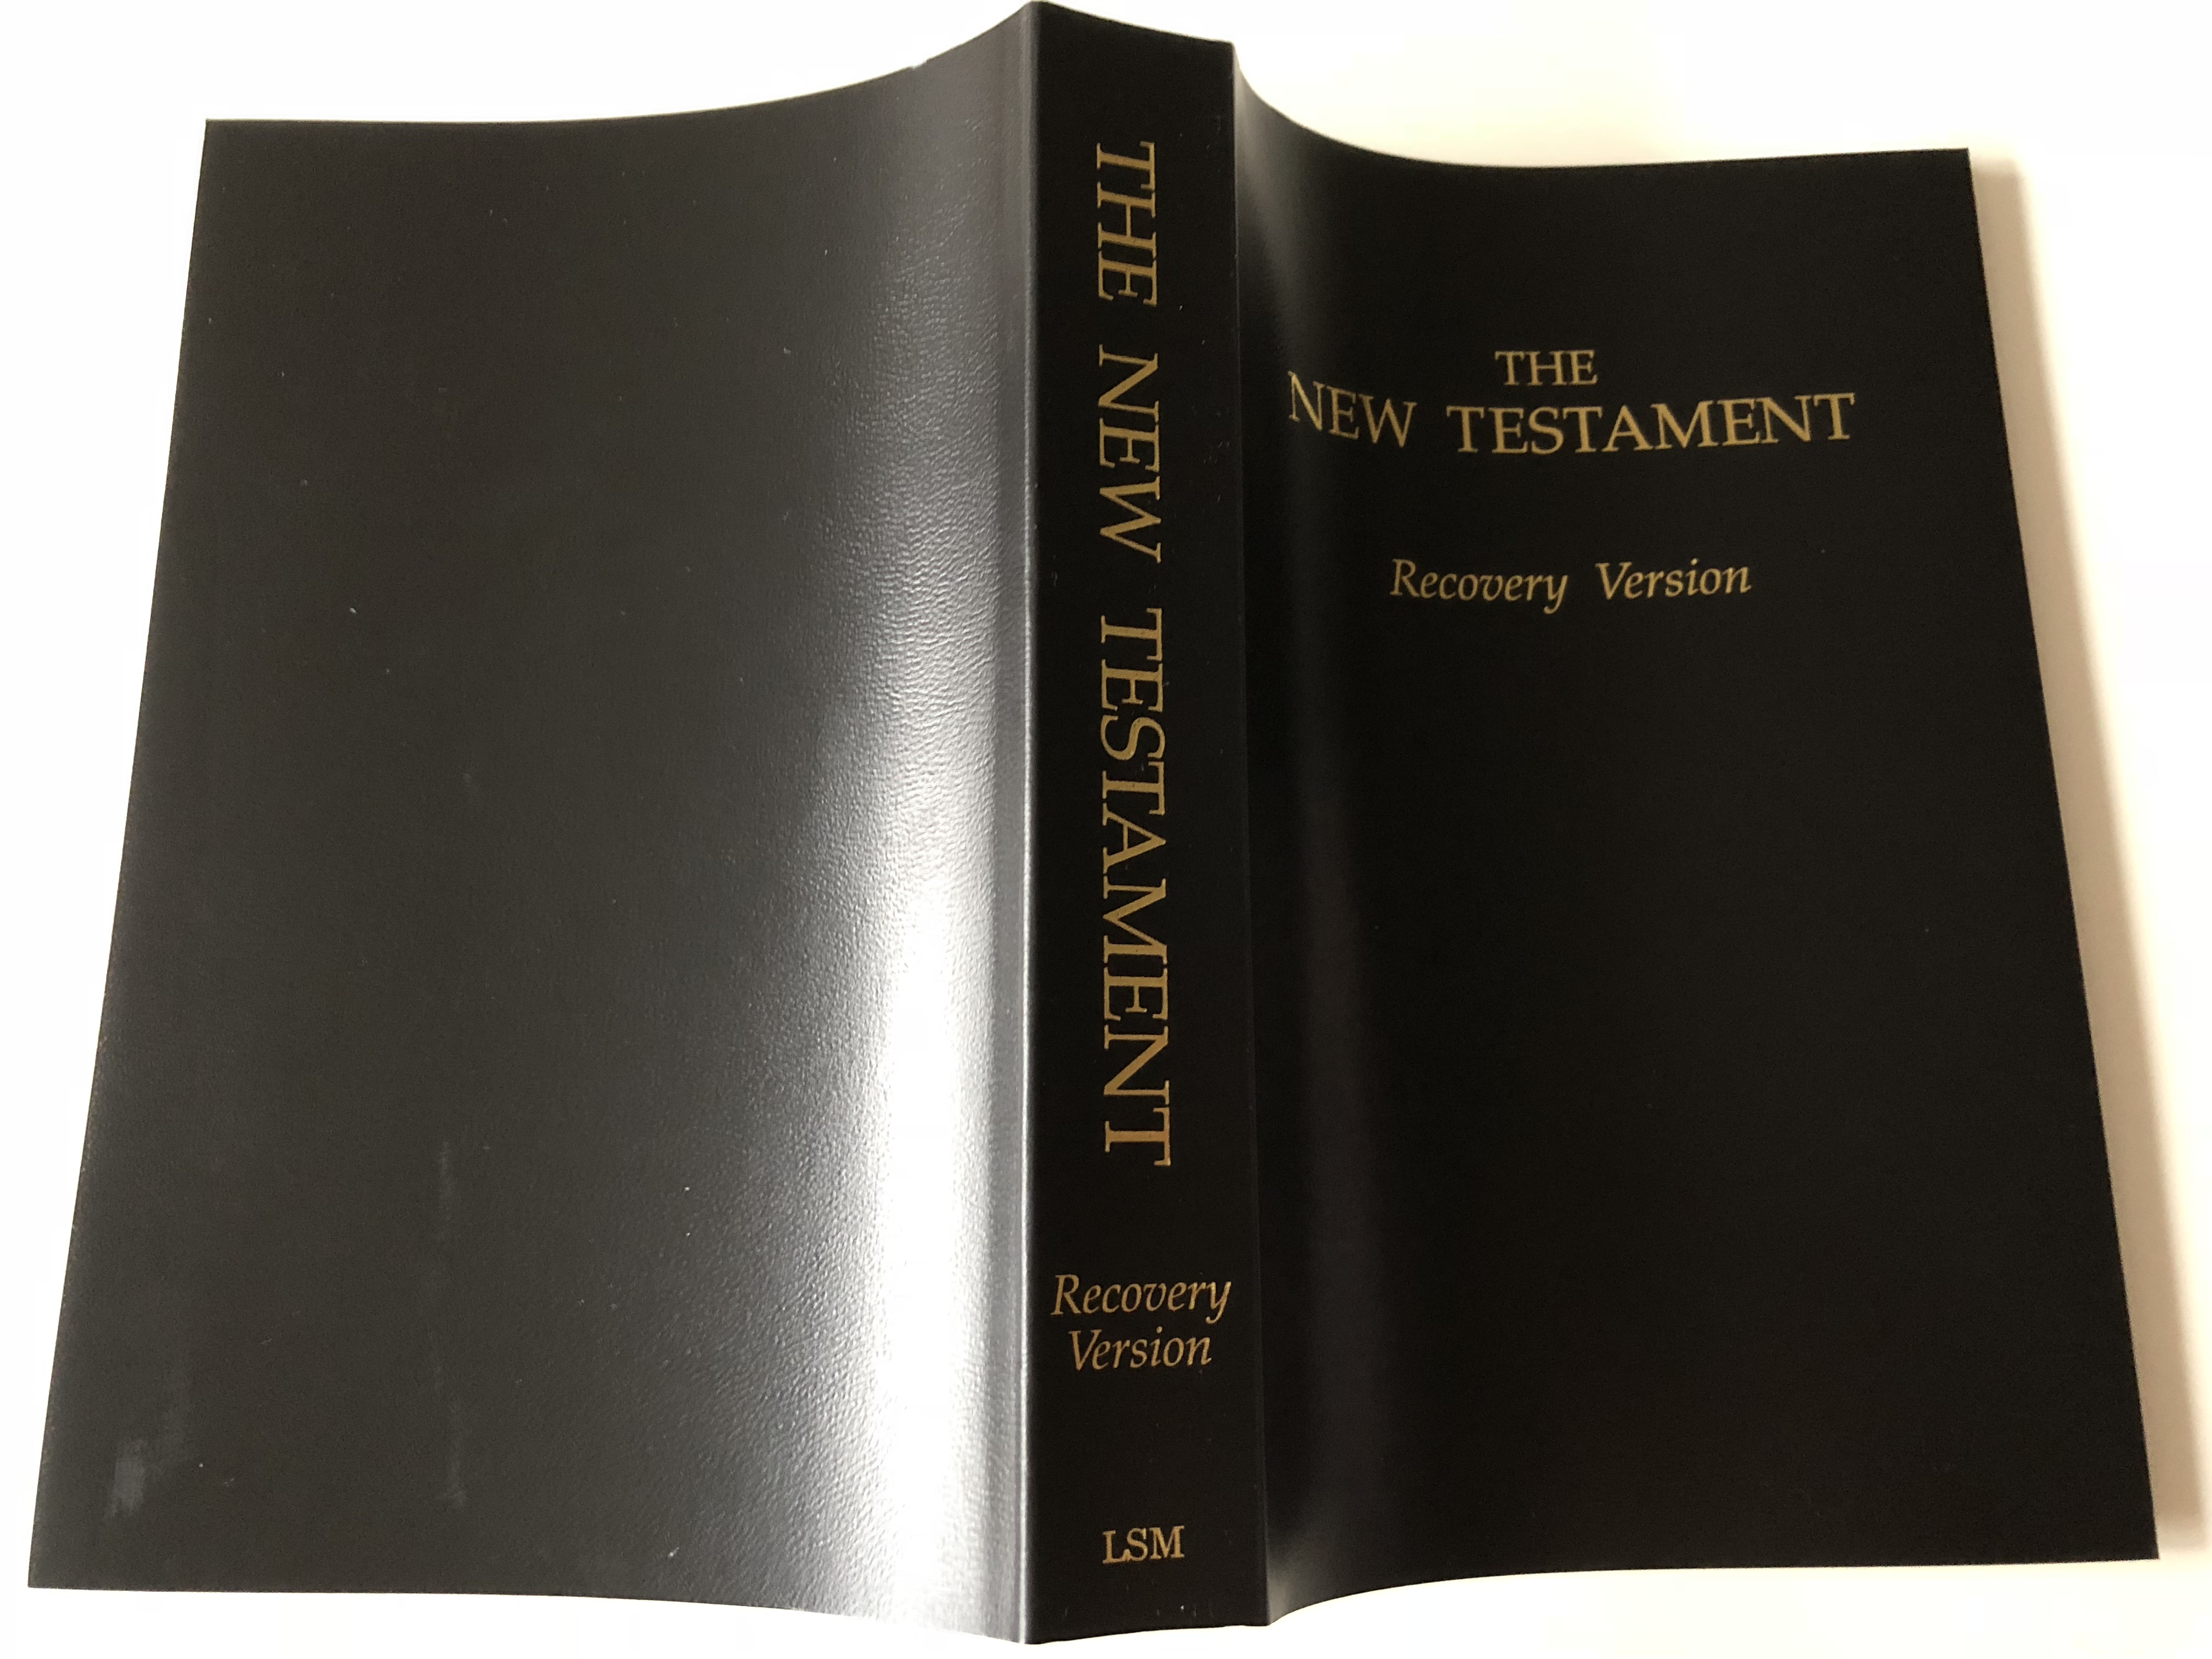 the-new-testament-recovery-version-living-stream-ministry-paperback-1991-black-2-.jpg